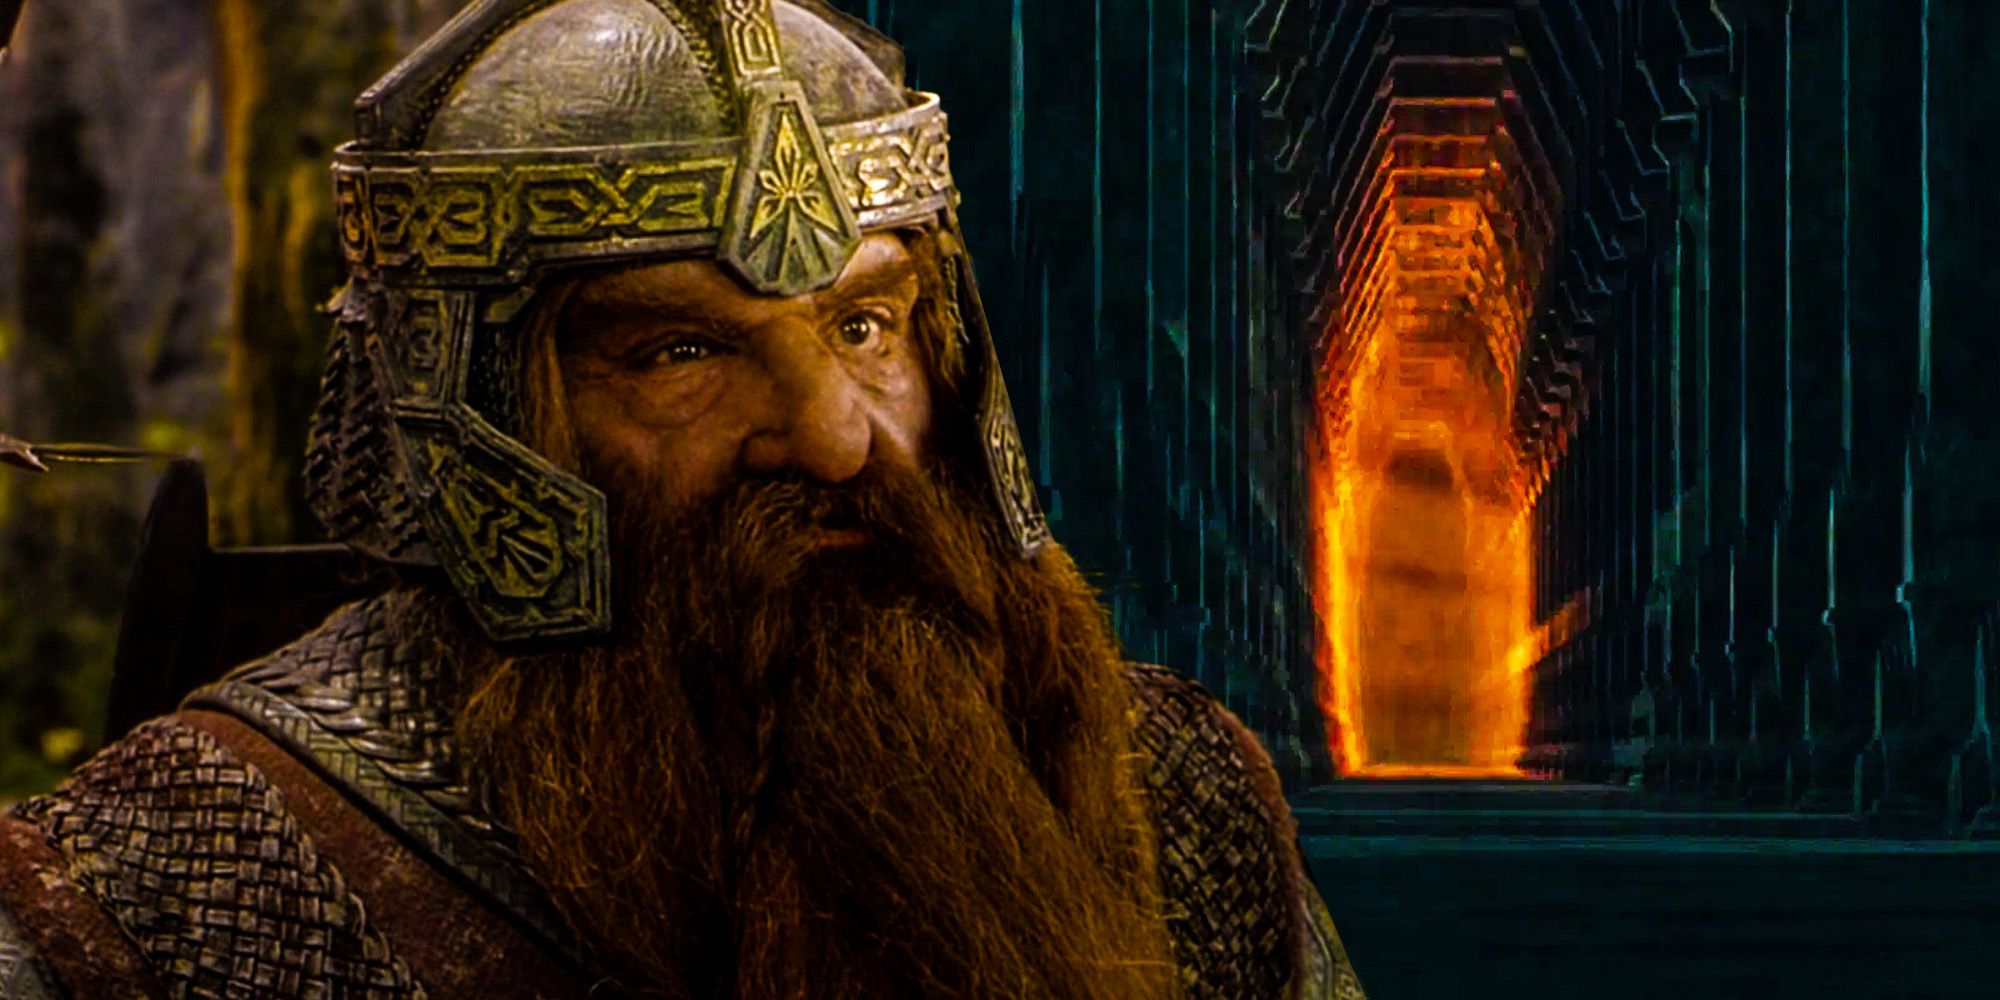 download lord of the rings return to moria